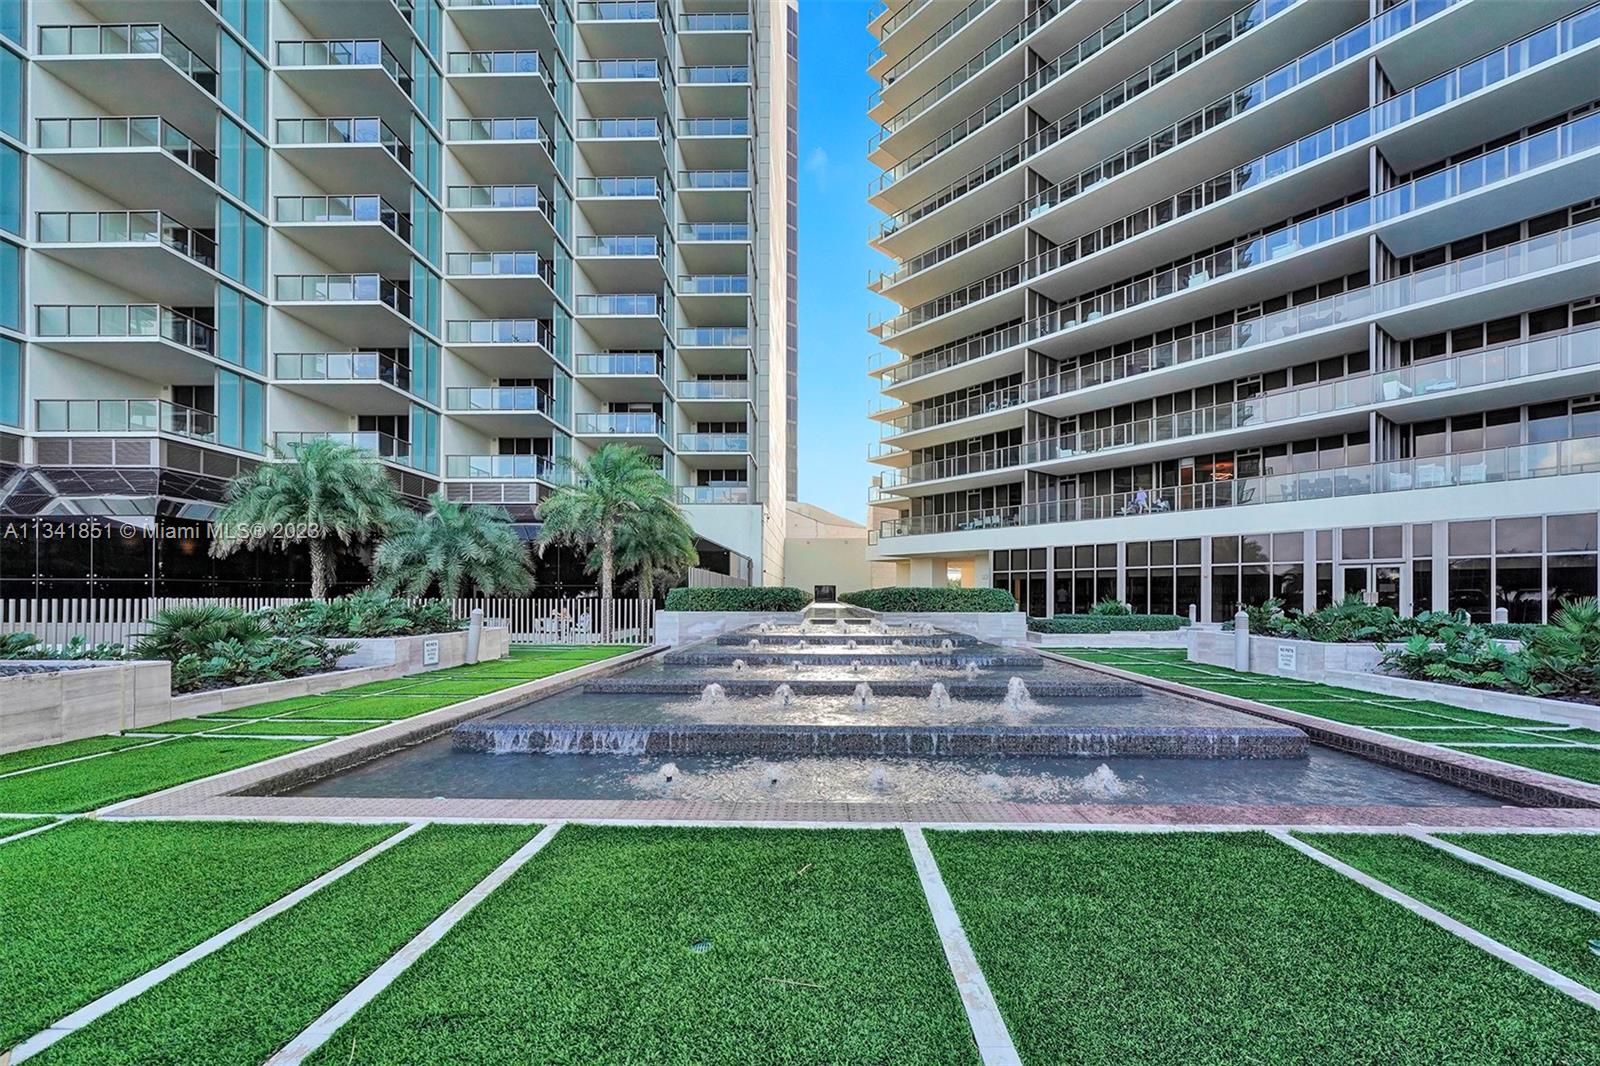 Photo 1 of St. Regis Bal Harbour Center Tower Apt 2501 in Bal Harbour - MLS A11341851